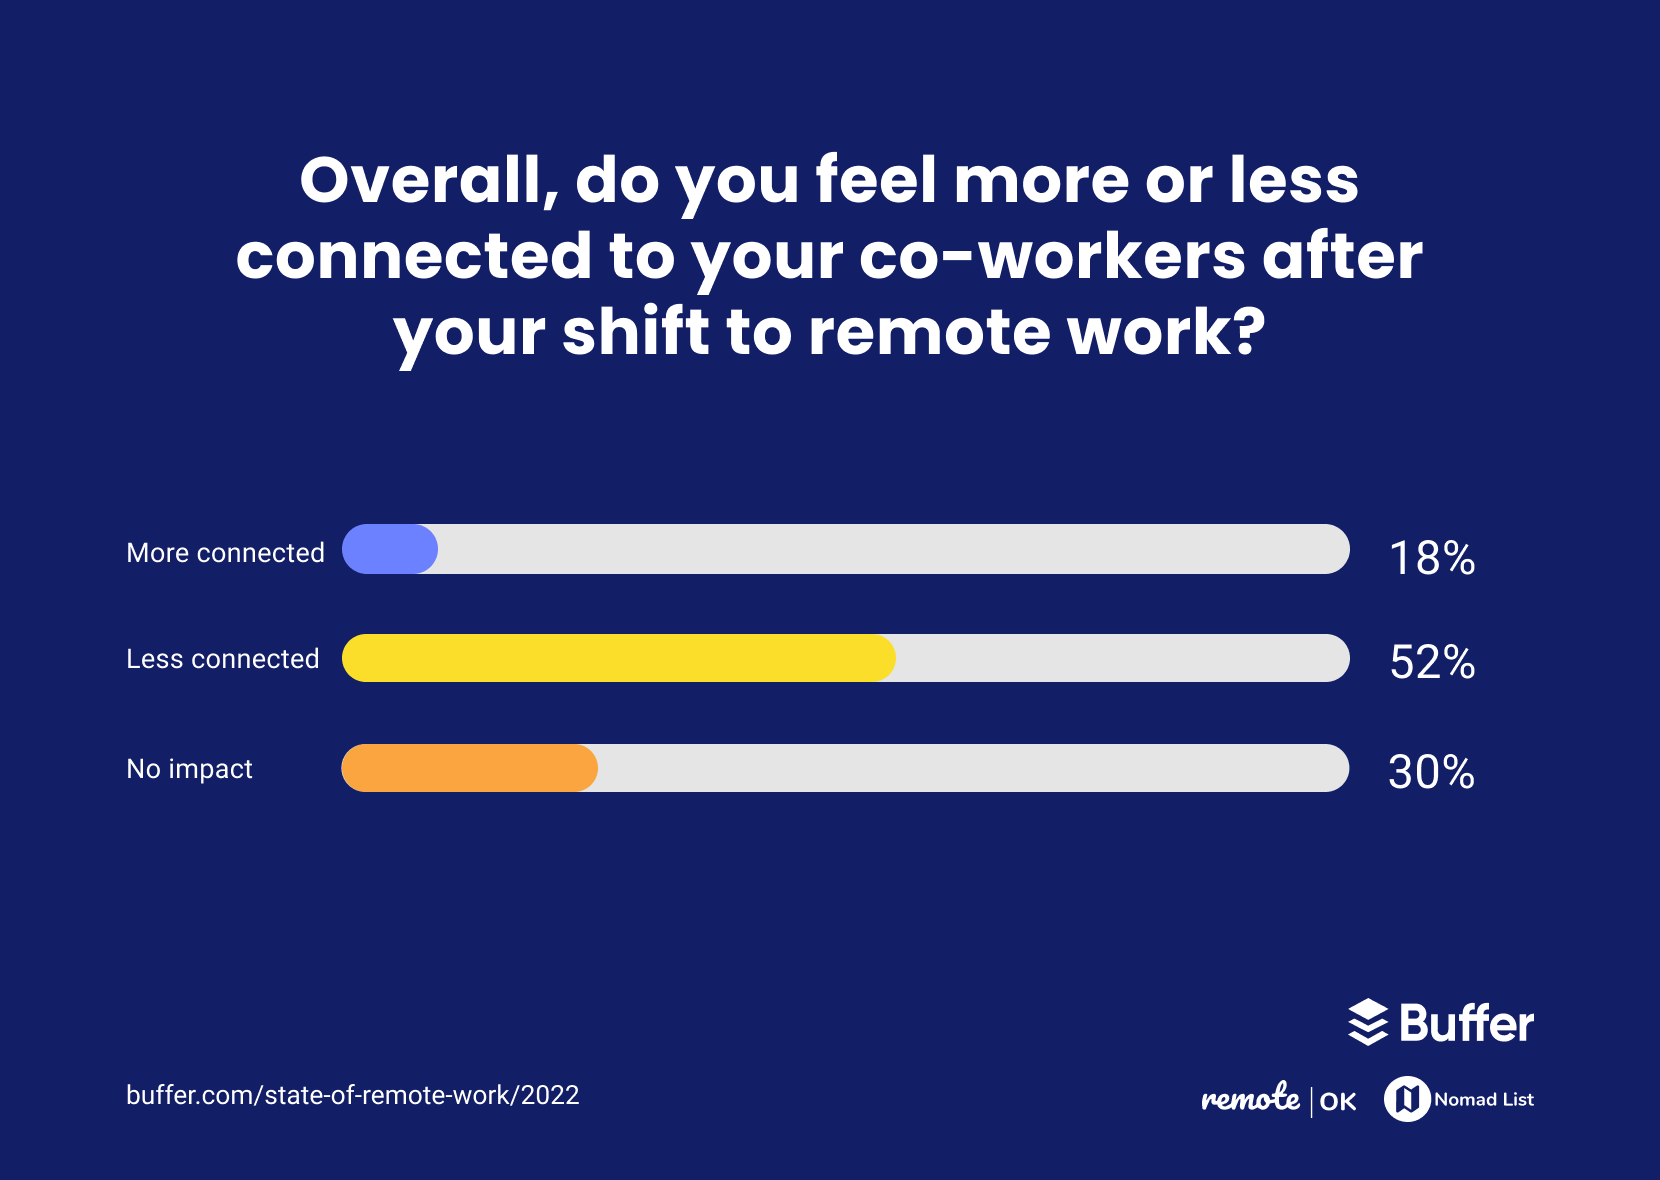 Overall, do you feel more or less connected to your co-workers after your shift to remote work?